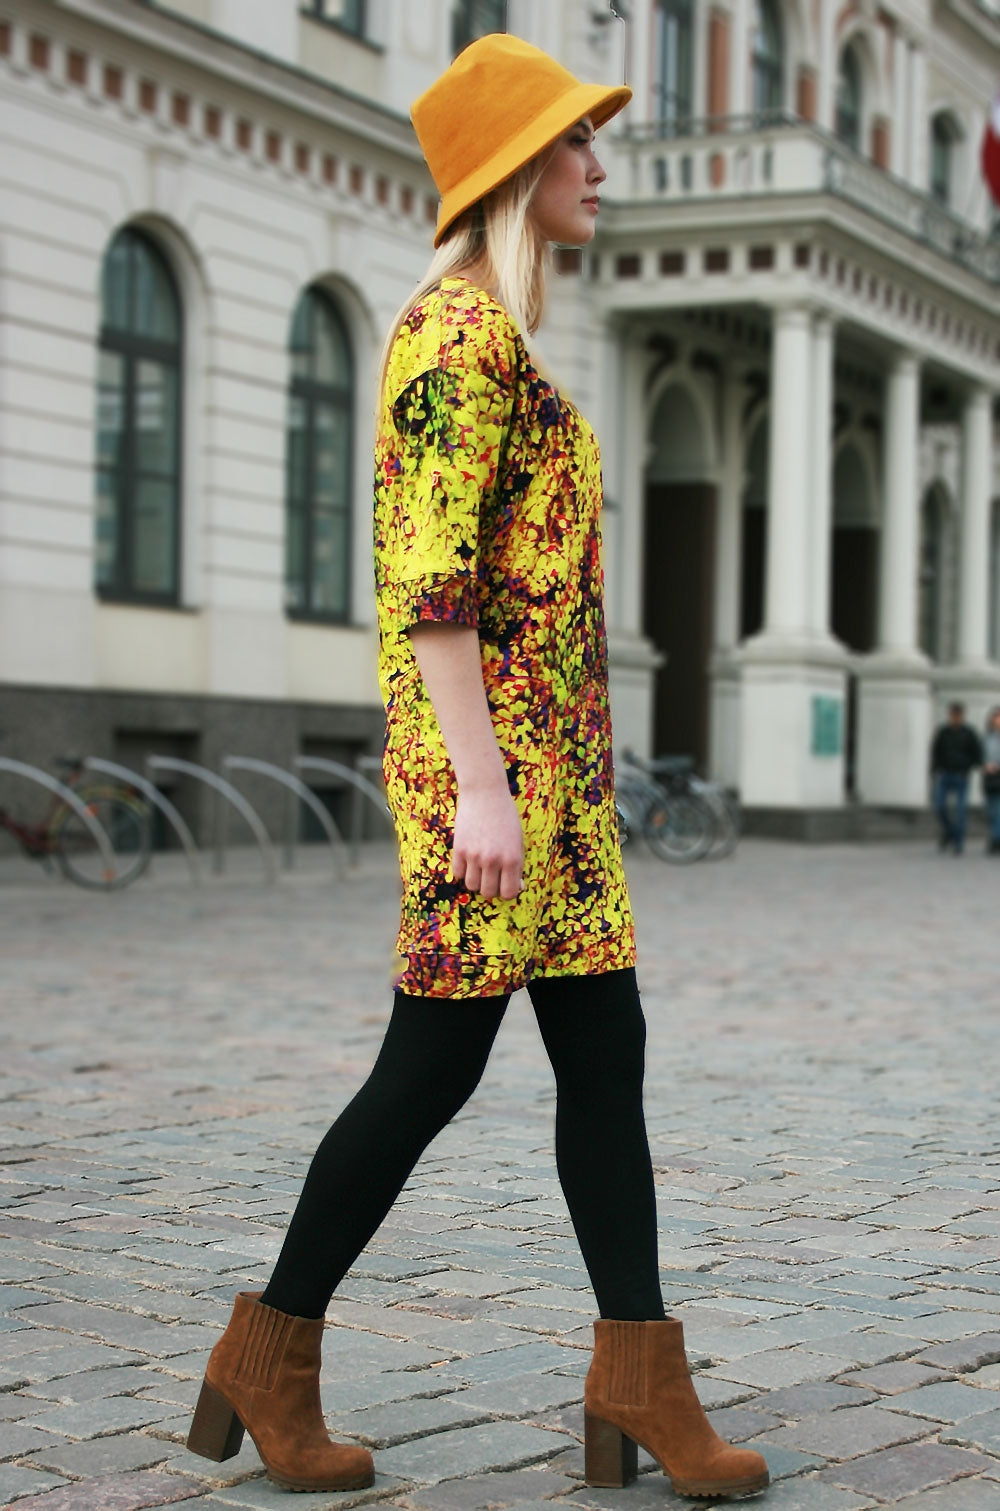 Jersey sweater-dress tunic with bright green leaf print